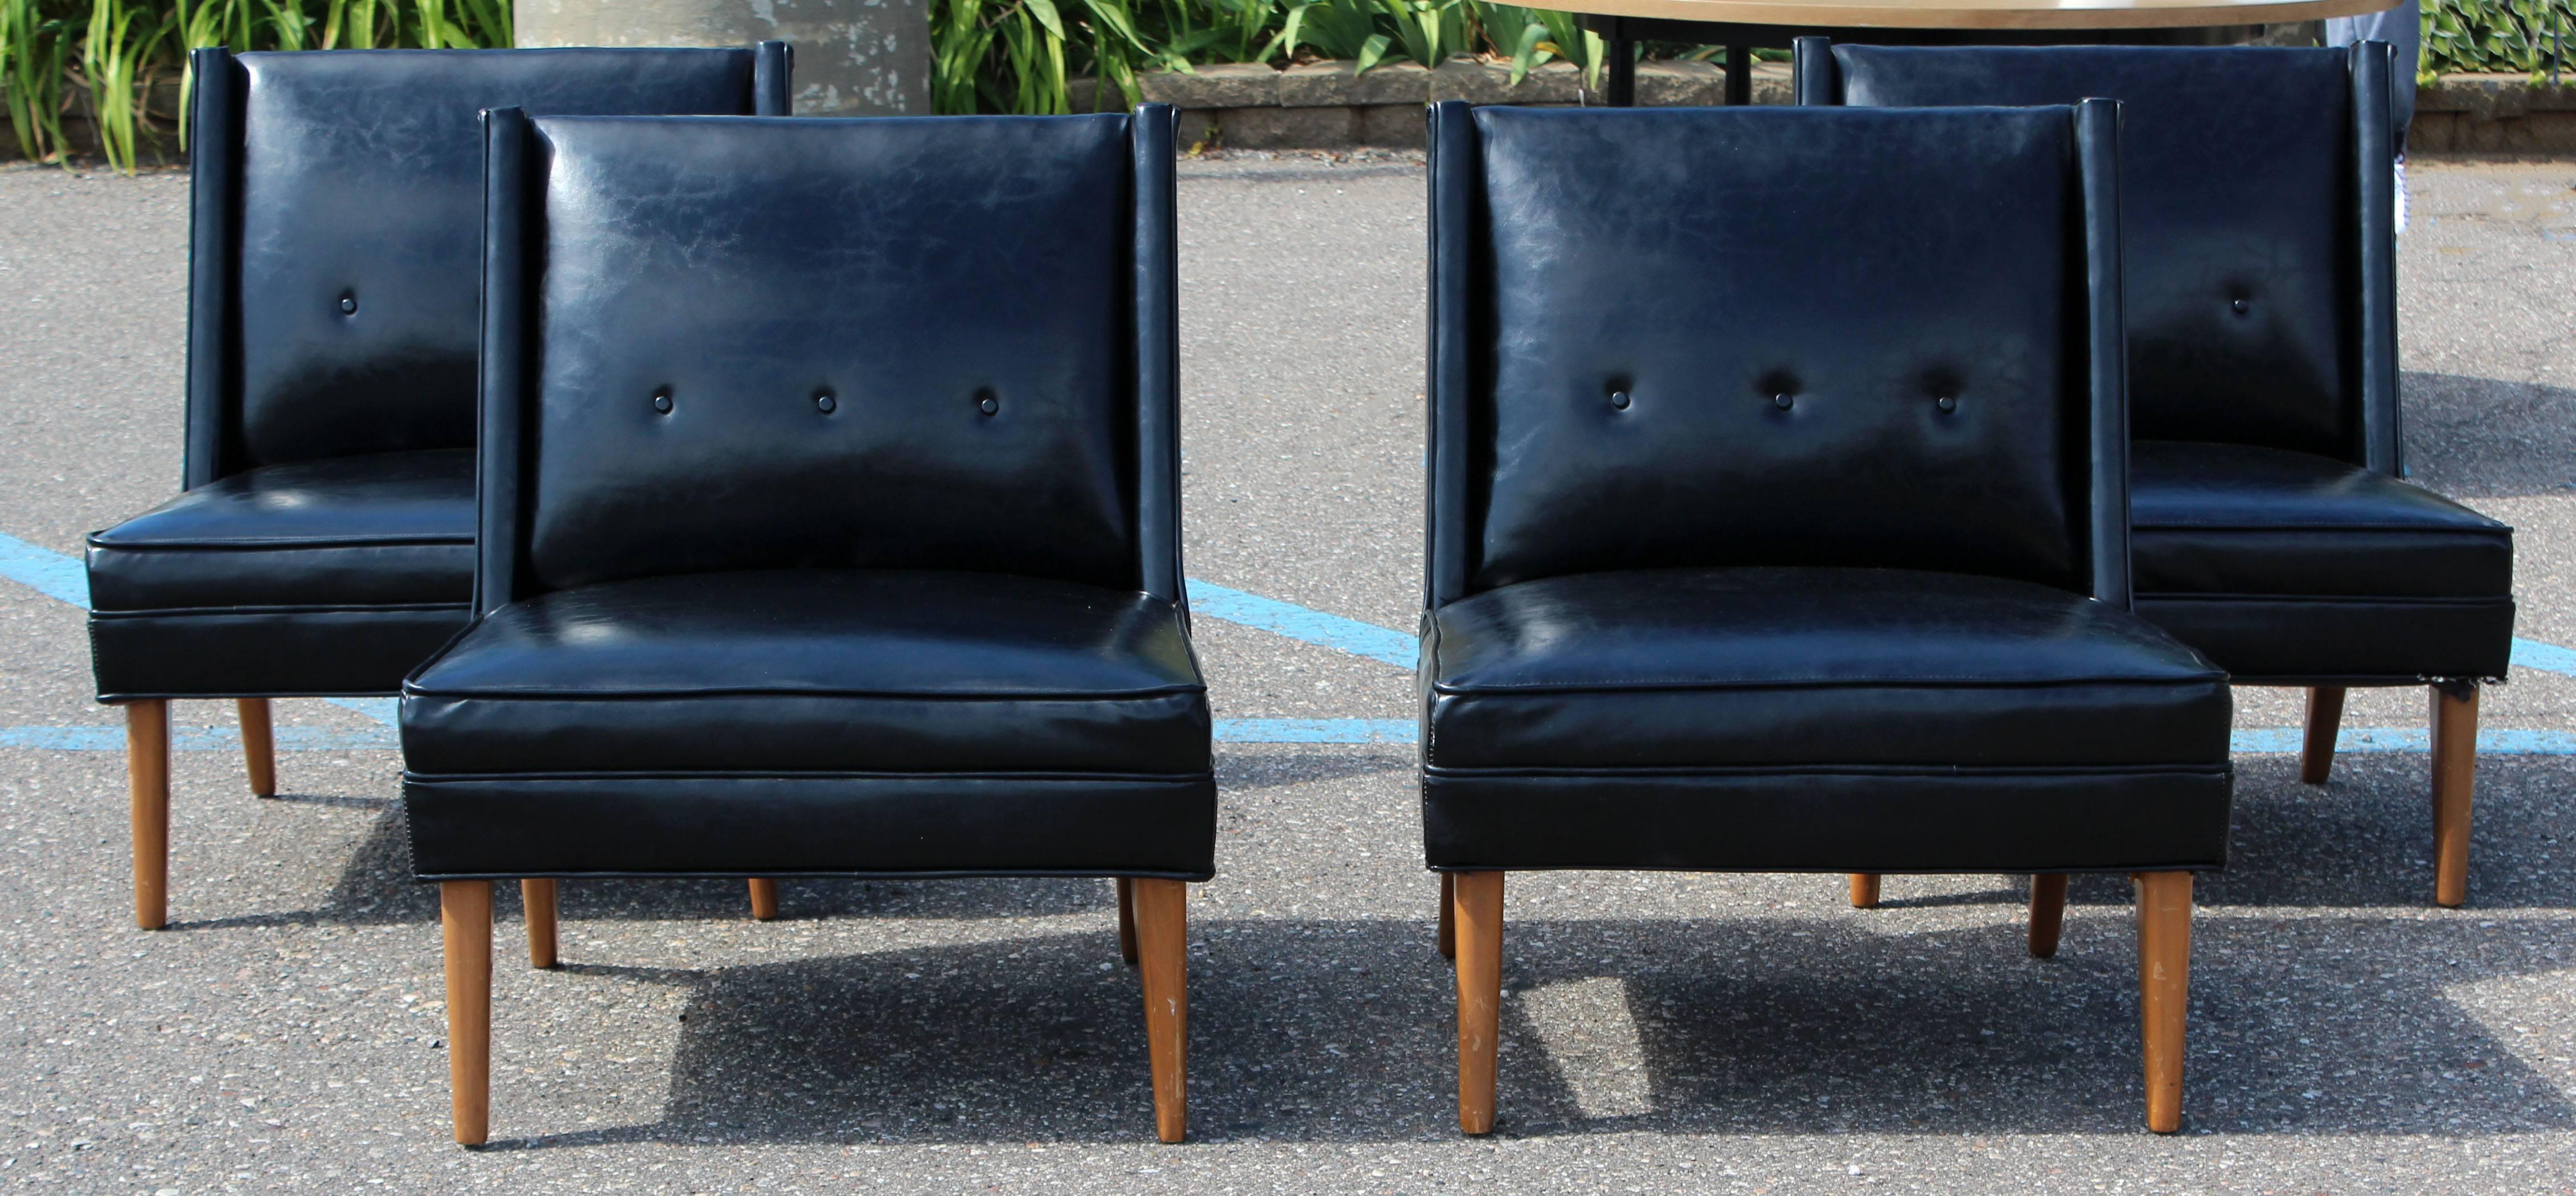 For your consideration is a gorgeous set of four slipper chairs, upholstered in black vinyl, on wooden frames, by Harvey Probber, circa the 1960s. In very good condition. This listing is for two sets of two chairs; we have four total available, and